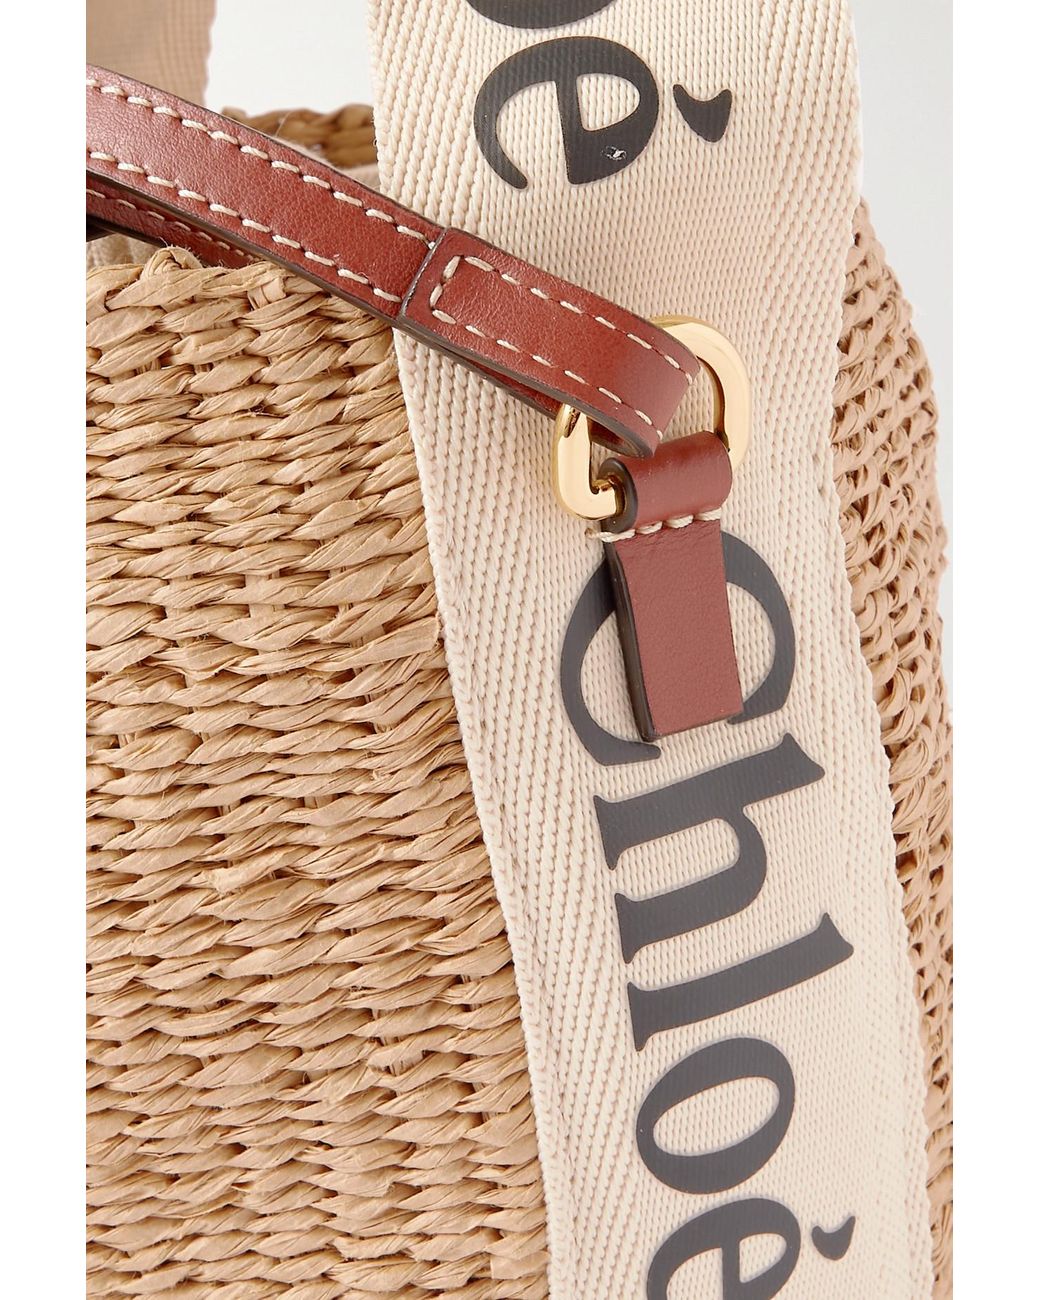 Chloé Woody Small Leather-trimmed Raffia Basket Bag in White